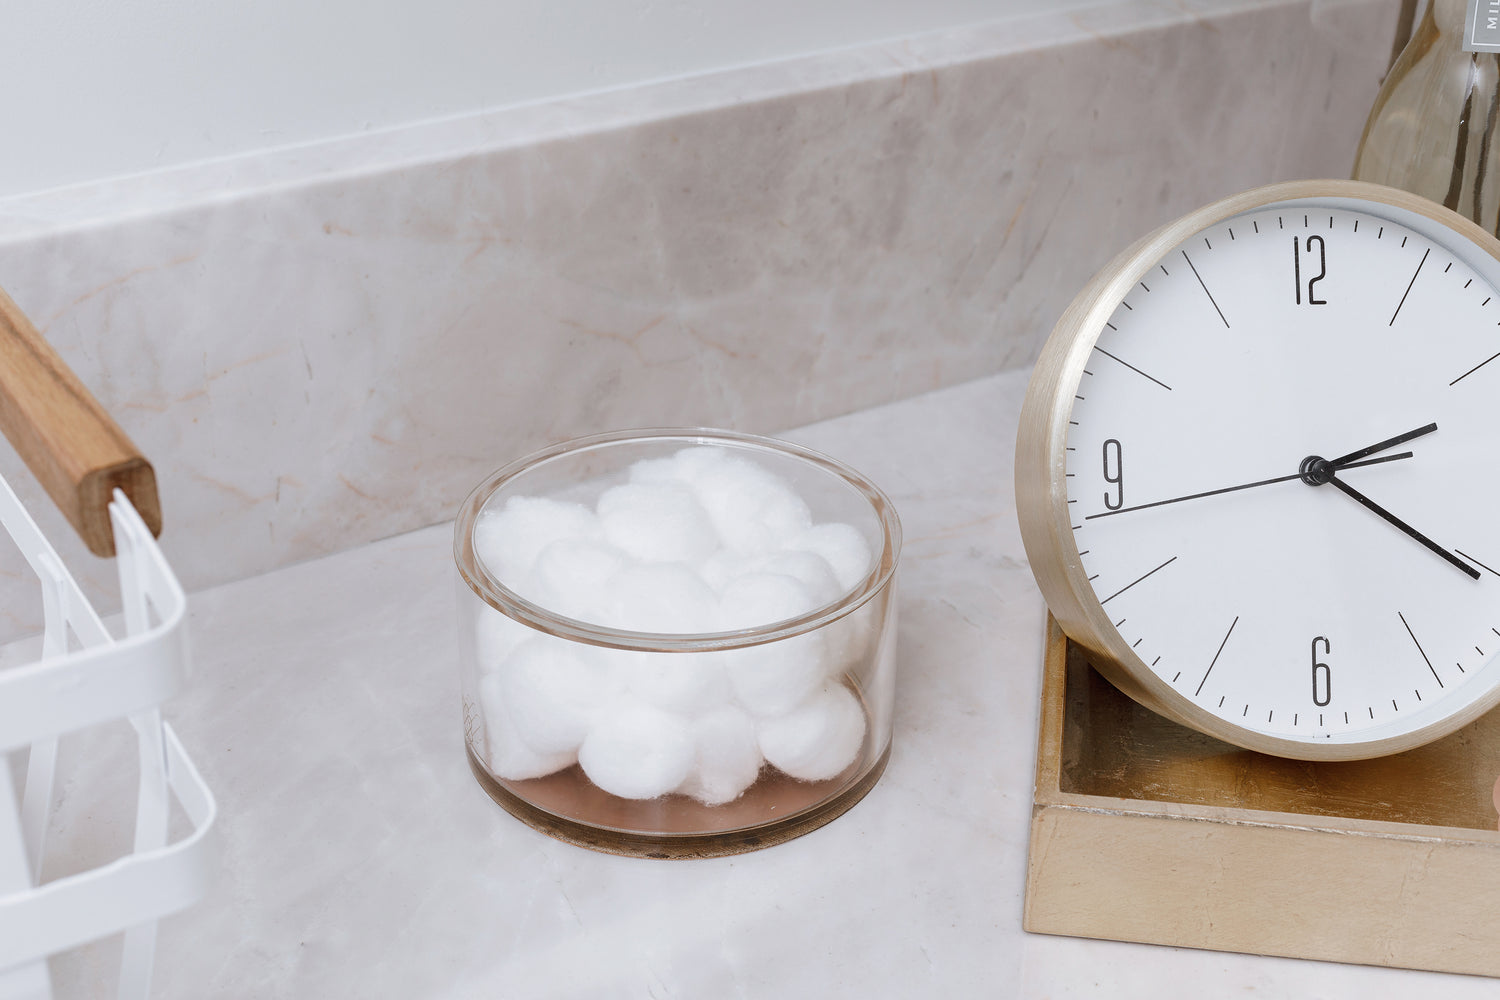 Cotton balls placed in a round acrylic storage container on the counter.